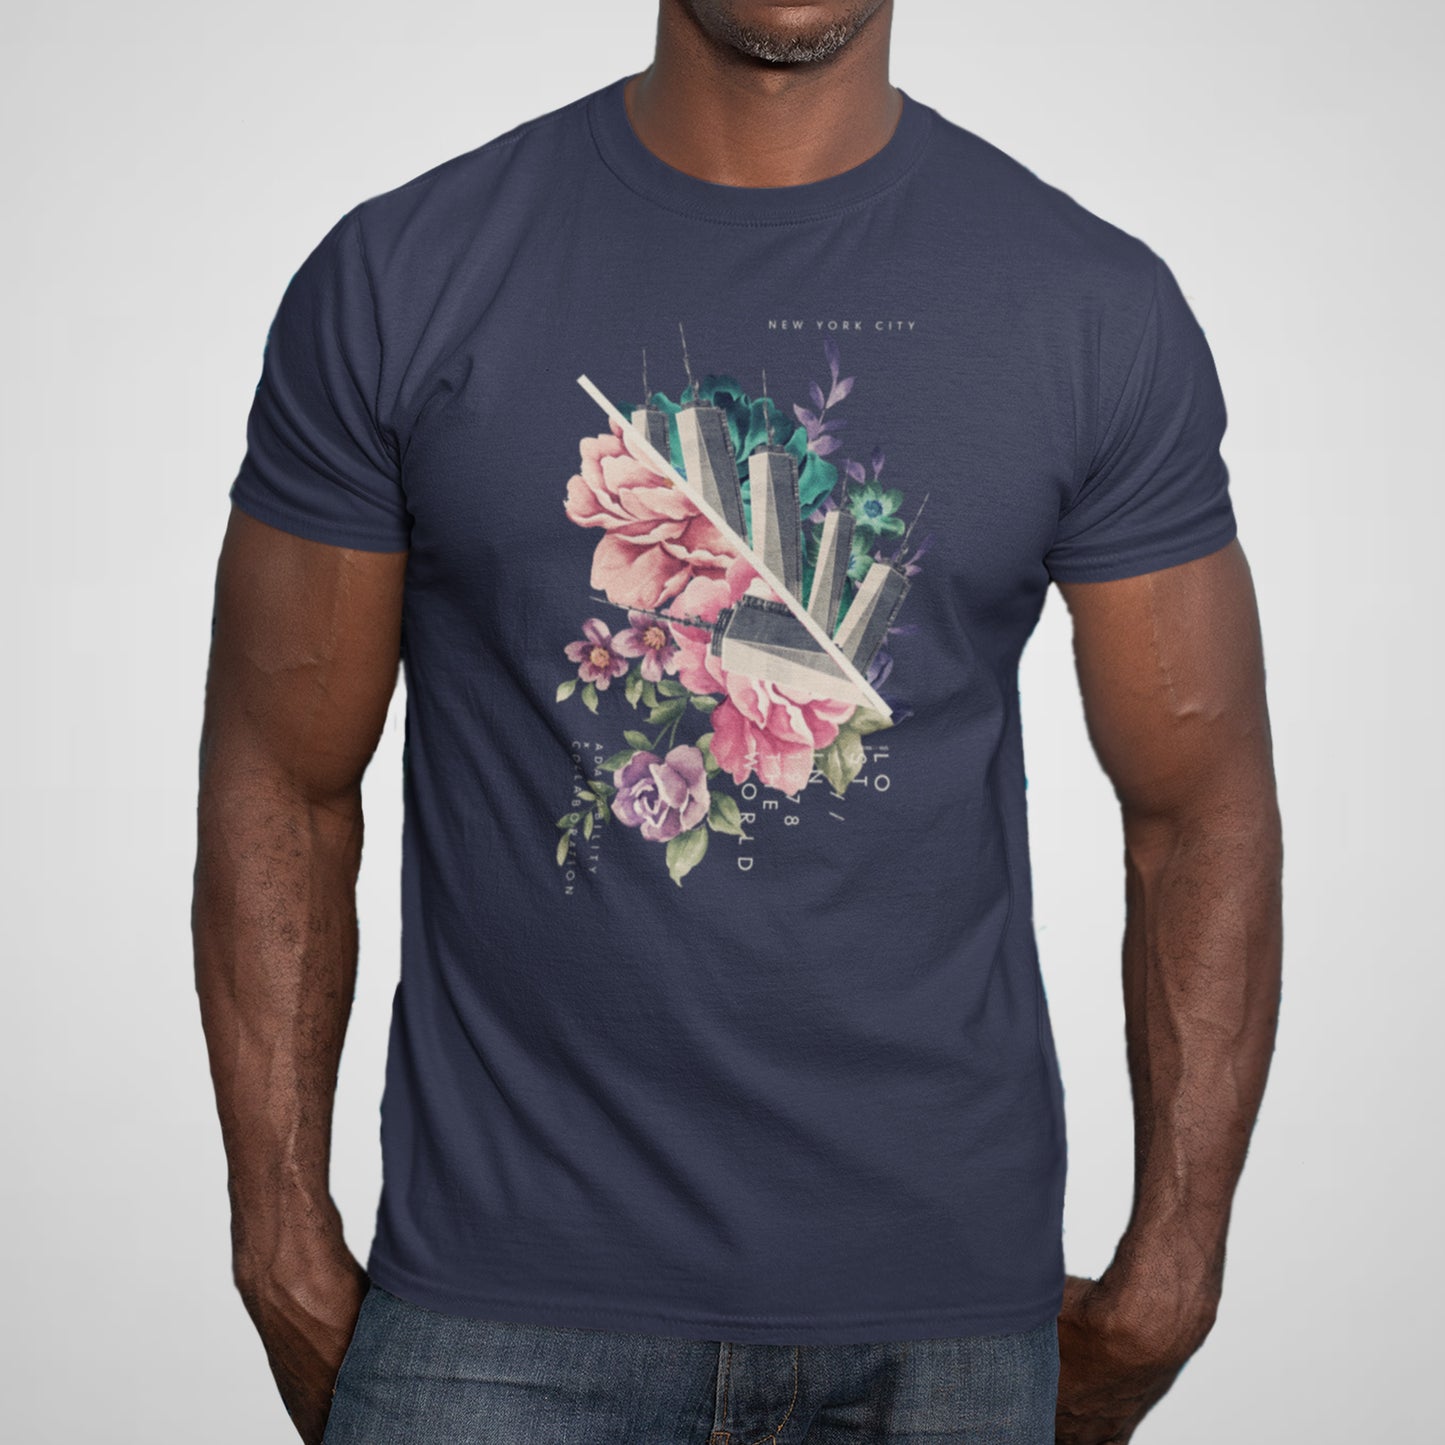 NYC Floral Collage - Adult Unisex Jersey Crew Tee